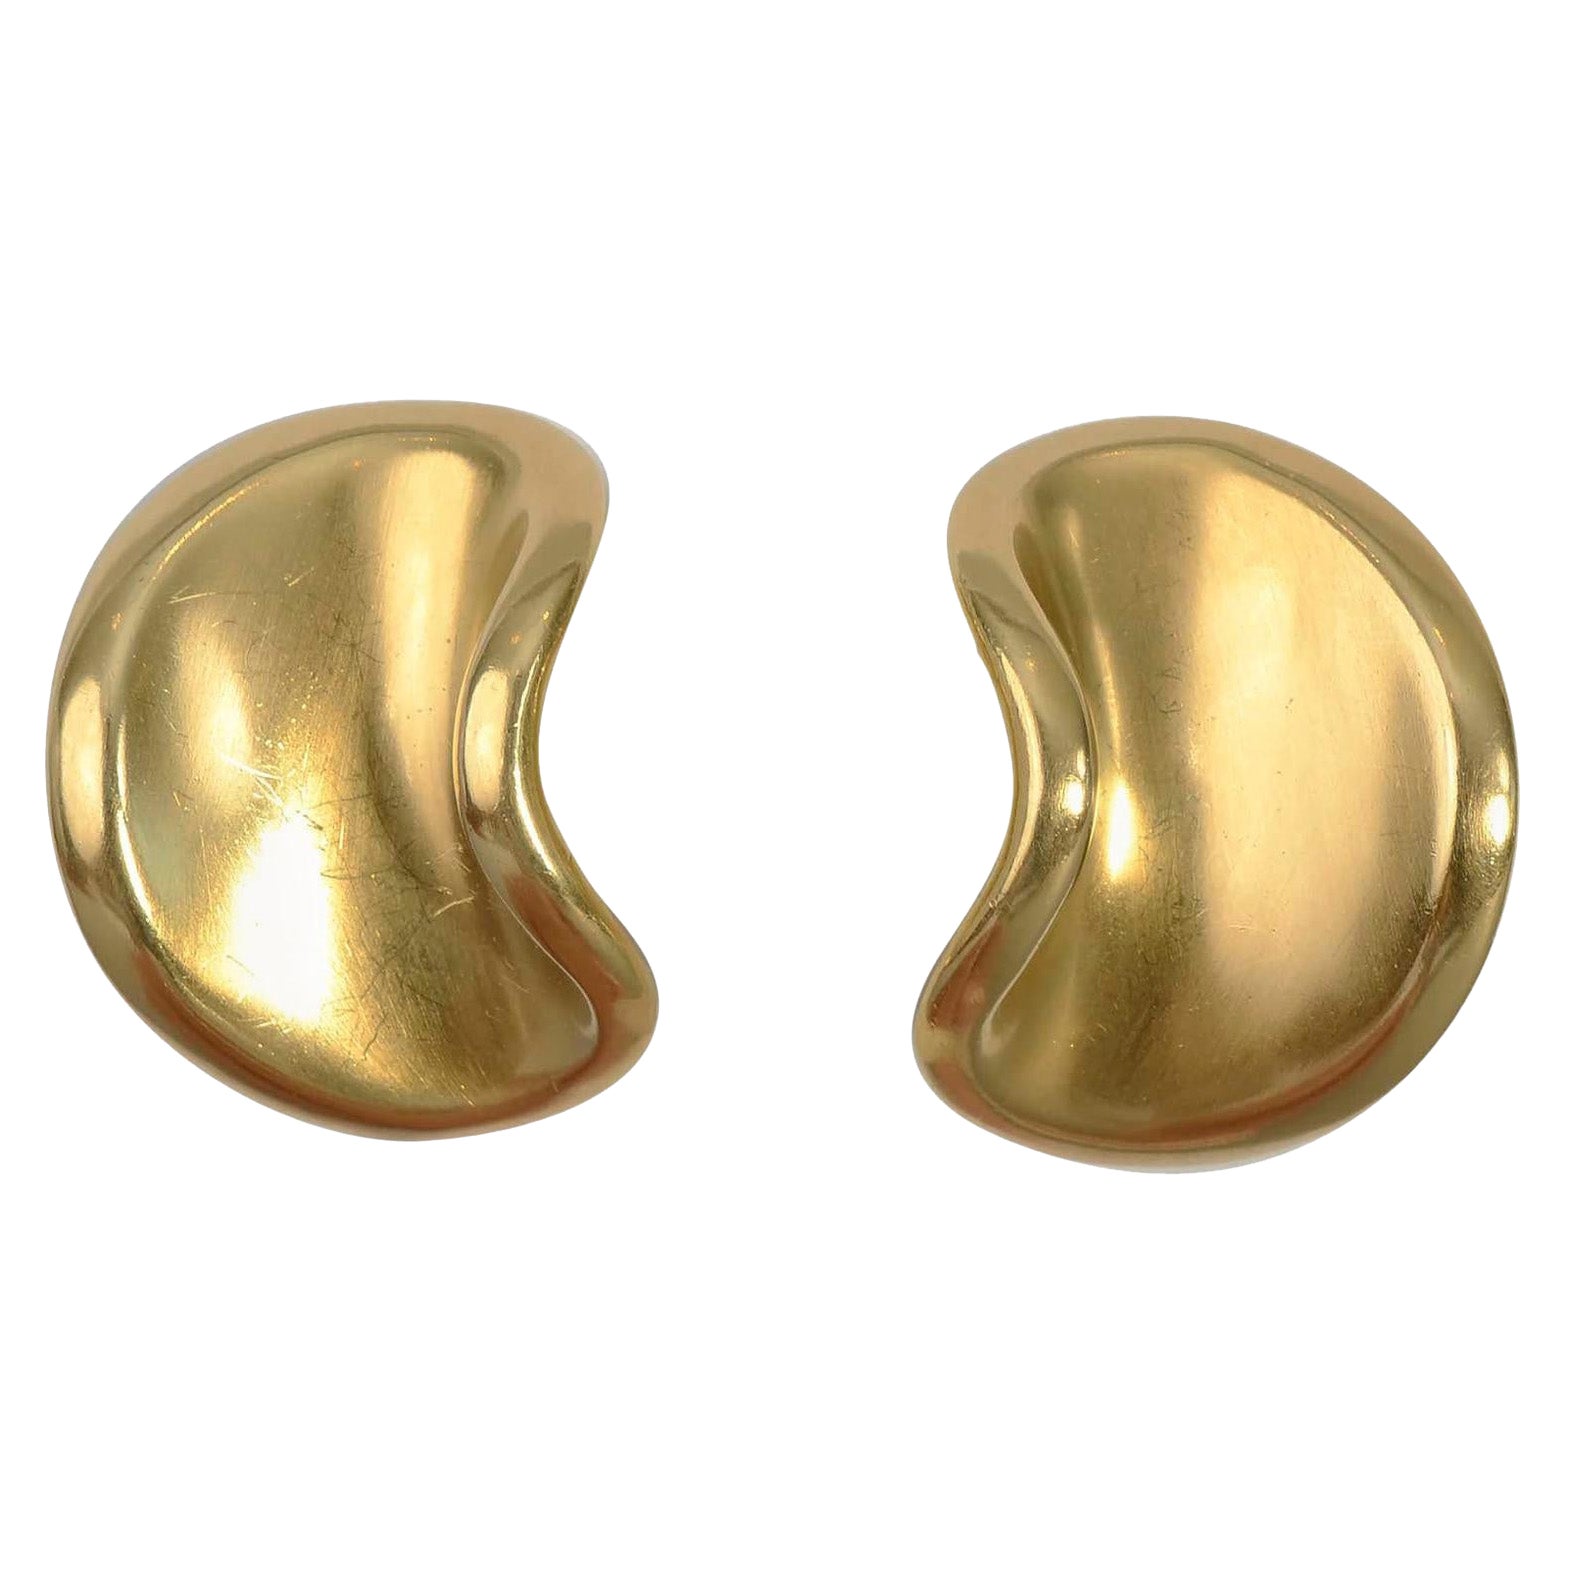 Angela Cummings Large Size Concave Lima Bean Shaped Gold Earrings